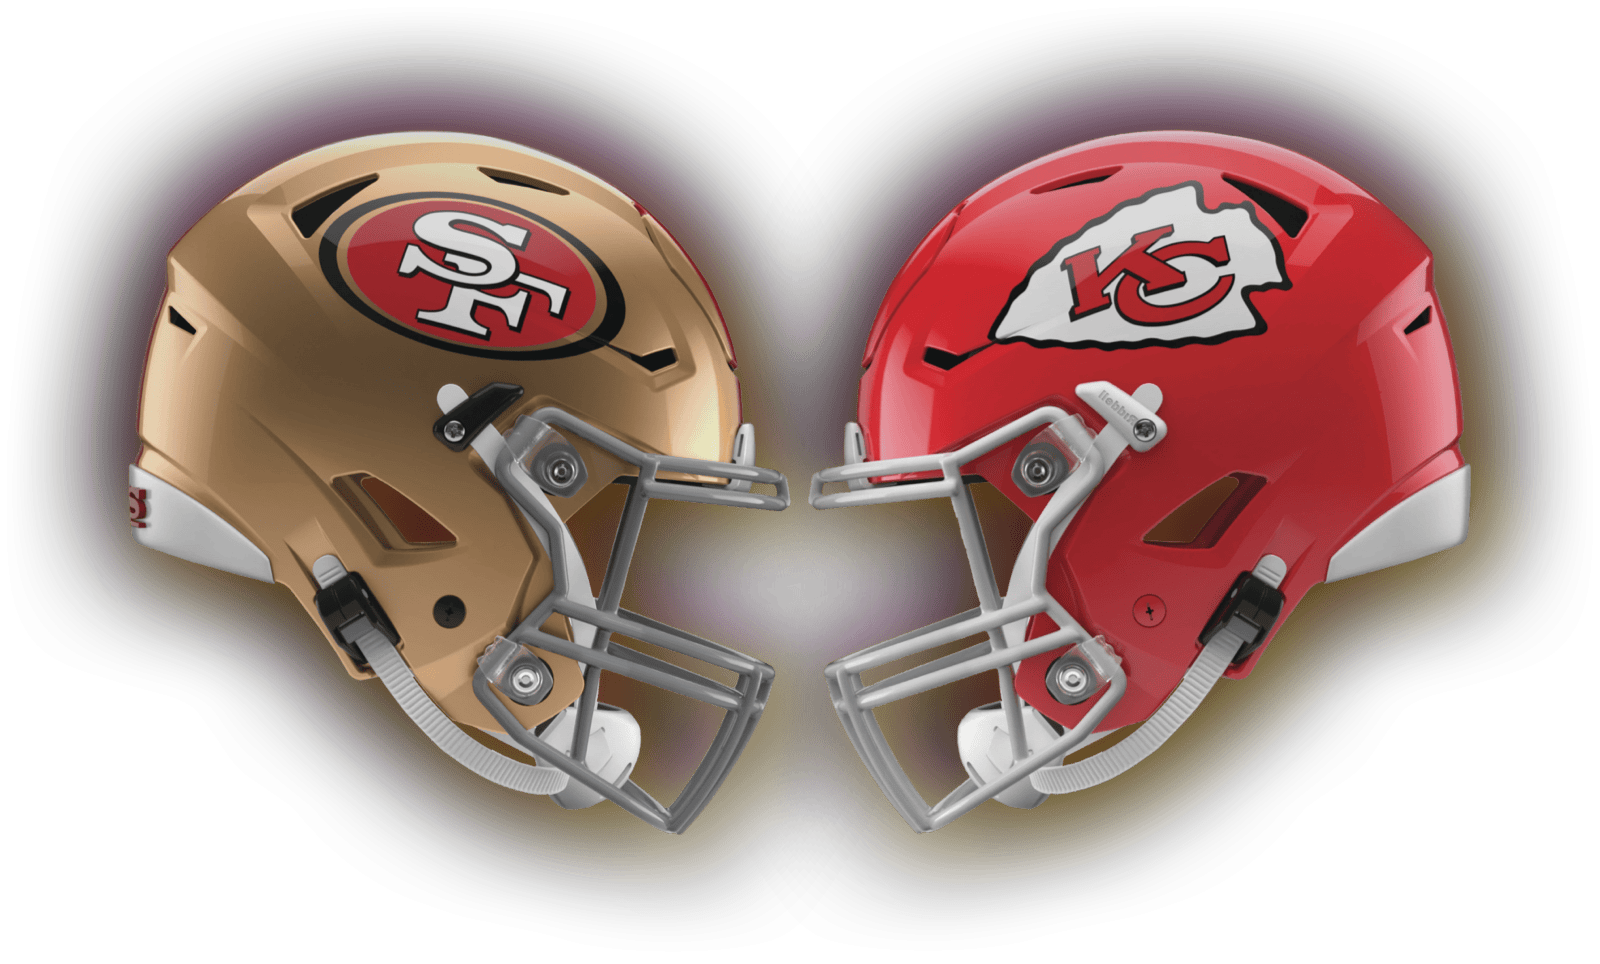 49ers and Chiefs helmets